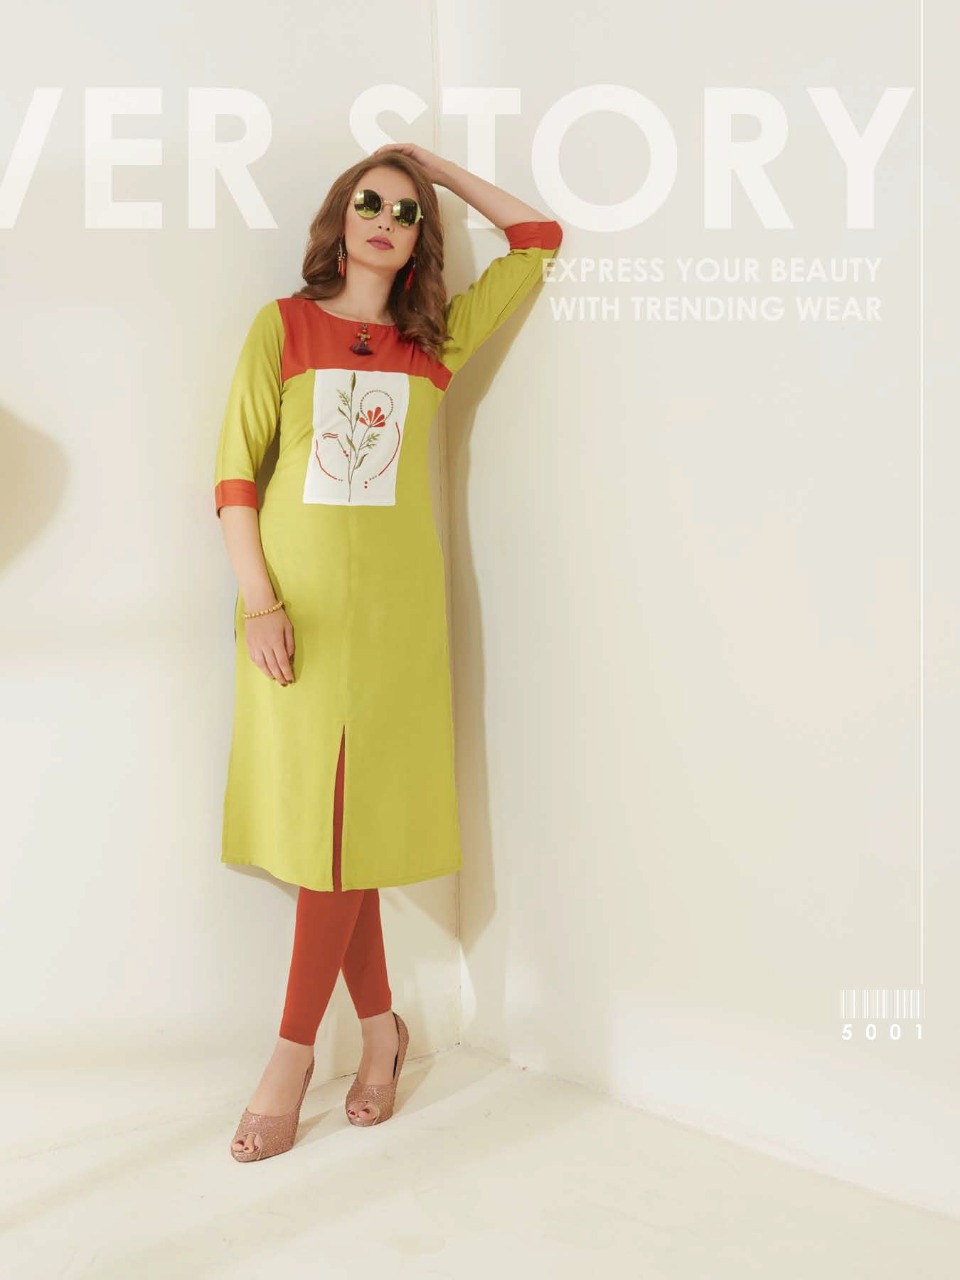 Amore vaarahi vol 5 simple ready to wear daily Kurties Collection Suppliers